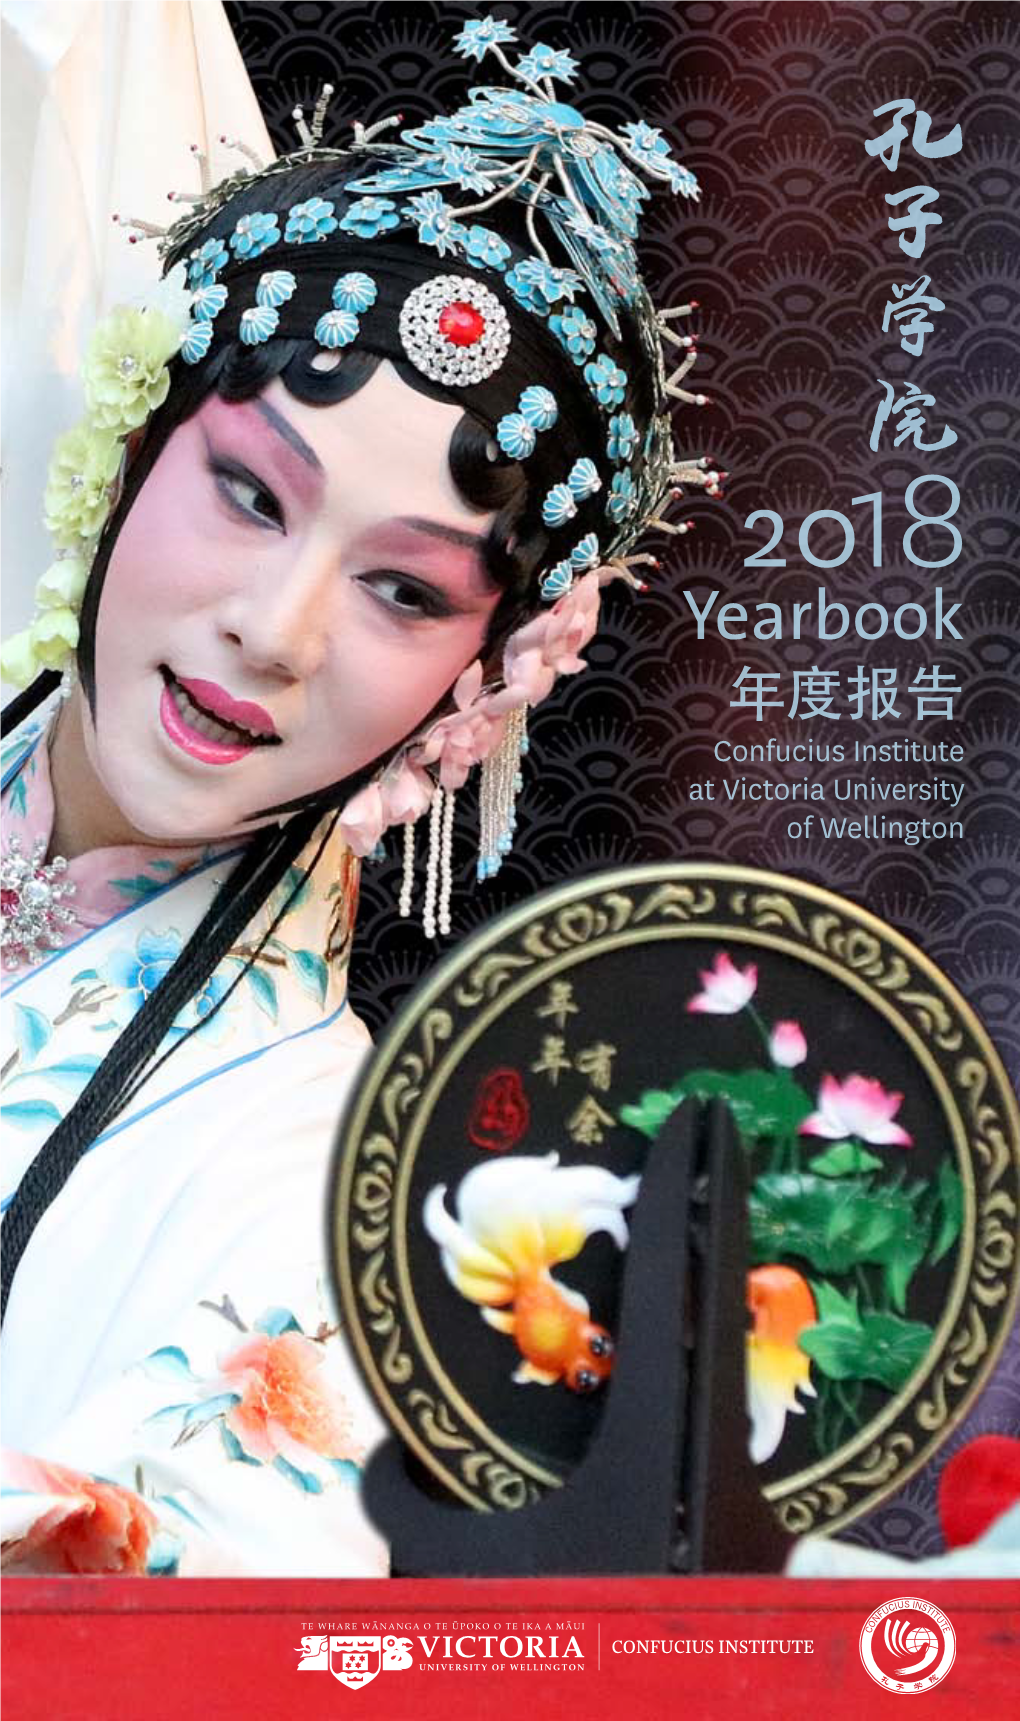 2018 Yearbook 年度报告 Confucius Institute at Victoria University of Wellington from the Chairman寄语